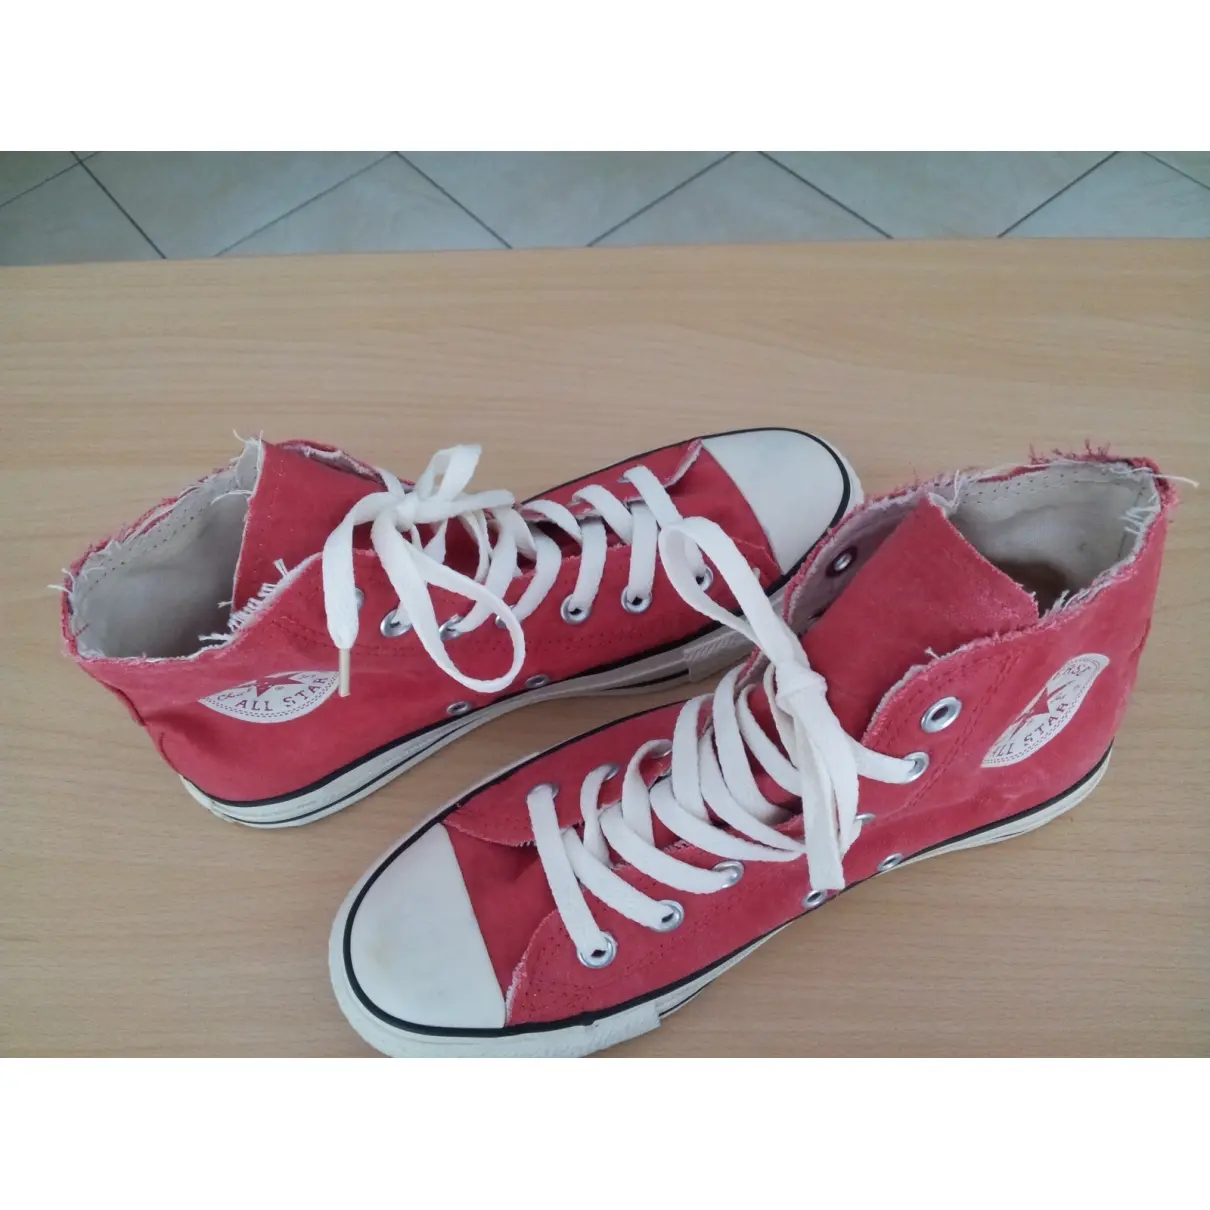 Converse Cloth high trainers for sale